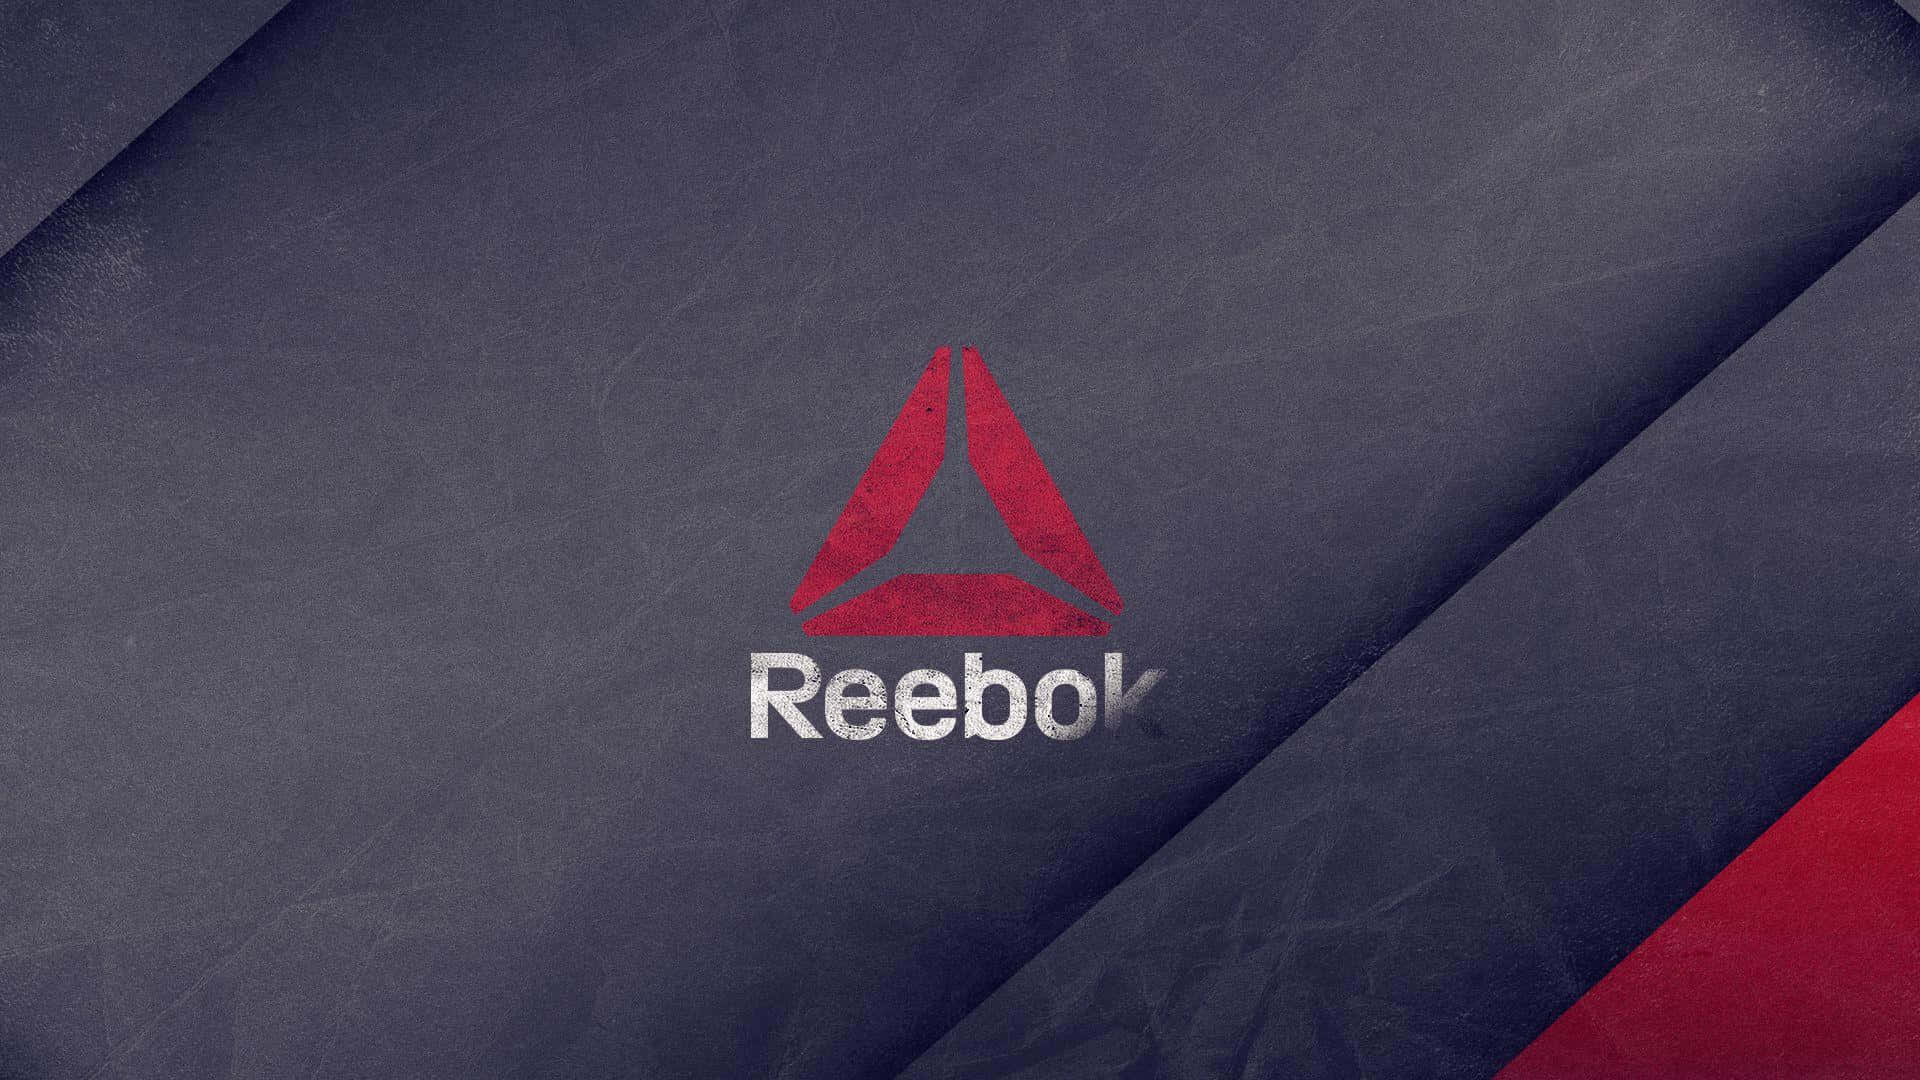 Step Up Your Performance Game With Reebok